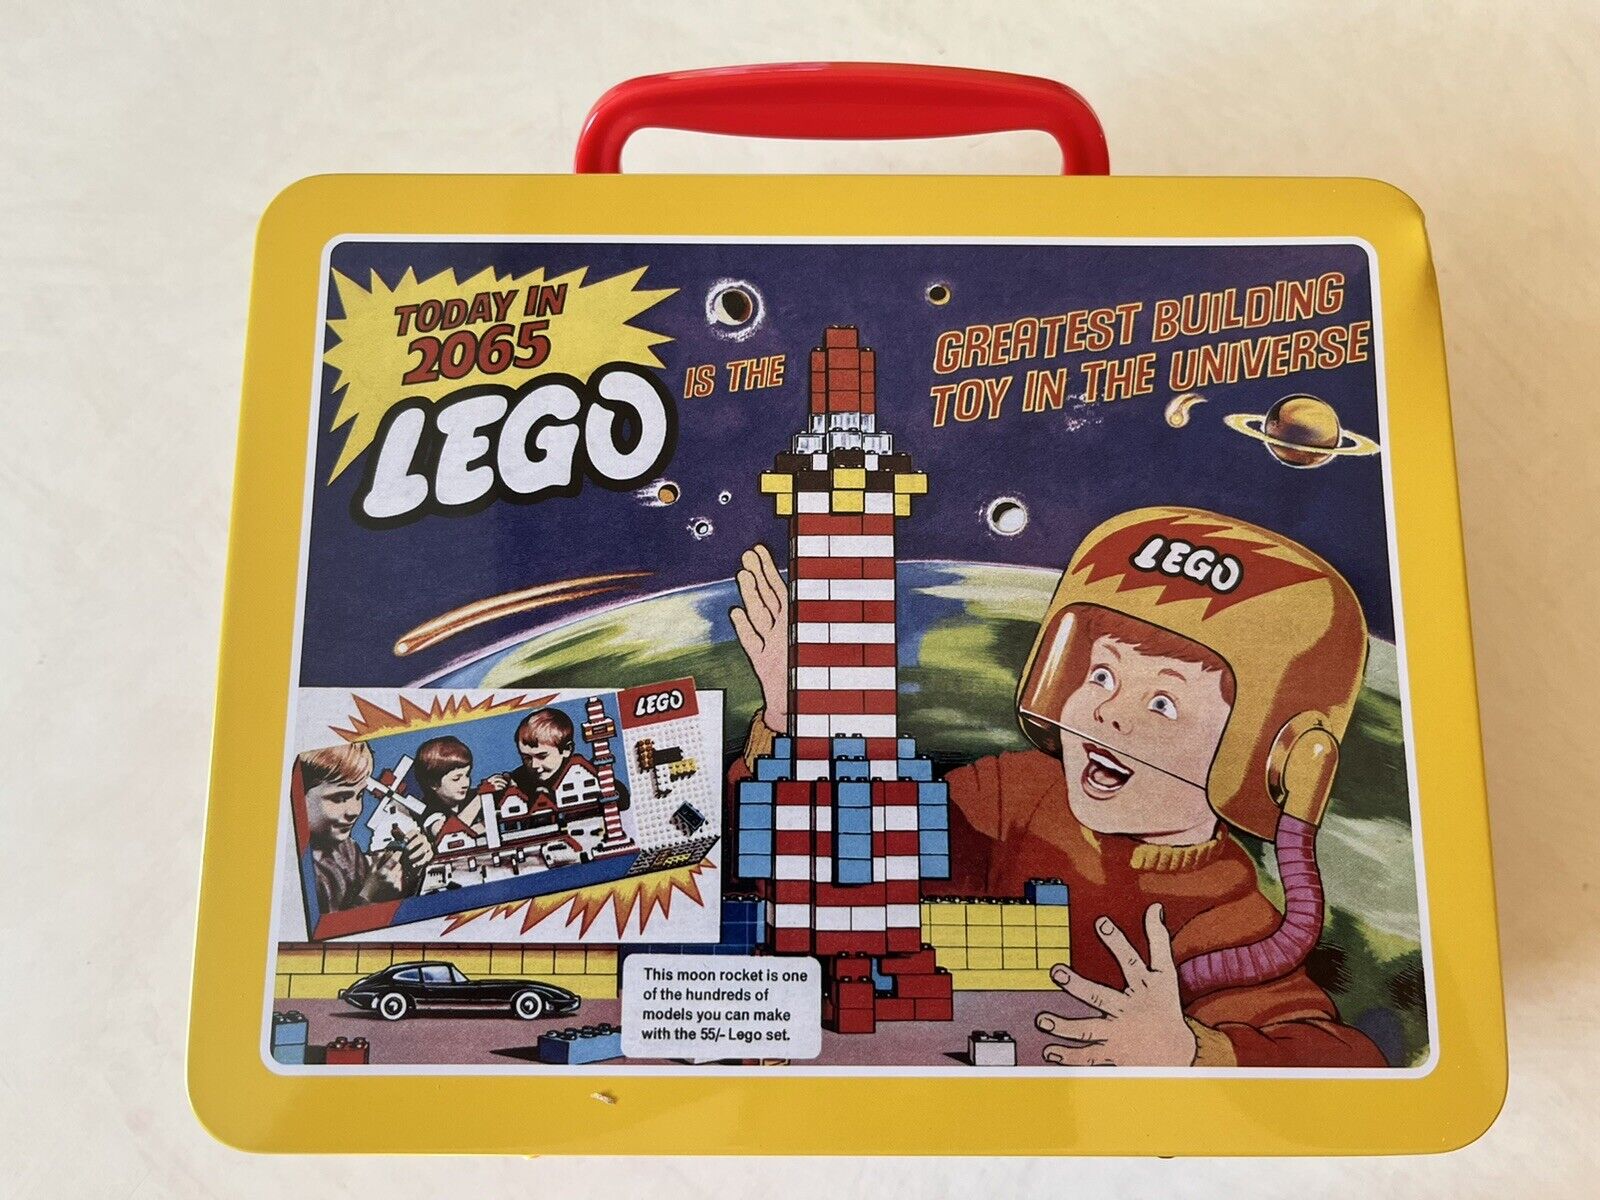 LEGO Tin Lunchbox Exclusive Promo. With Iconic 1965 Advert